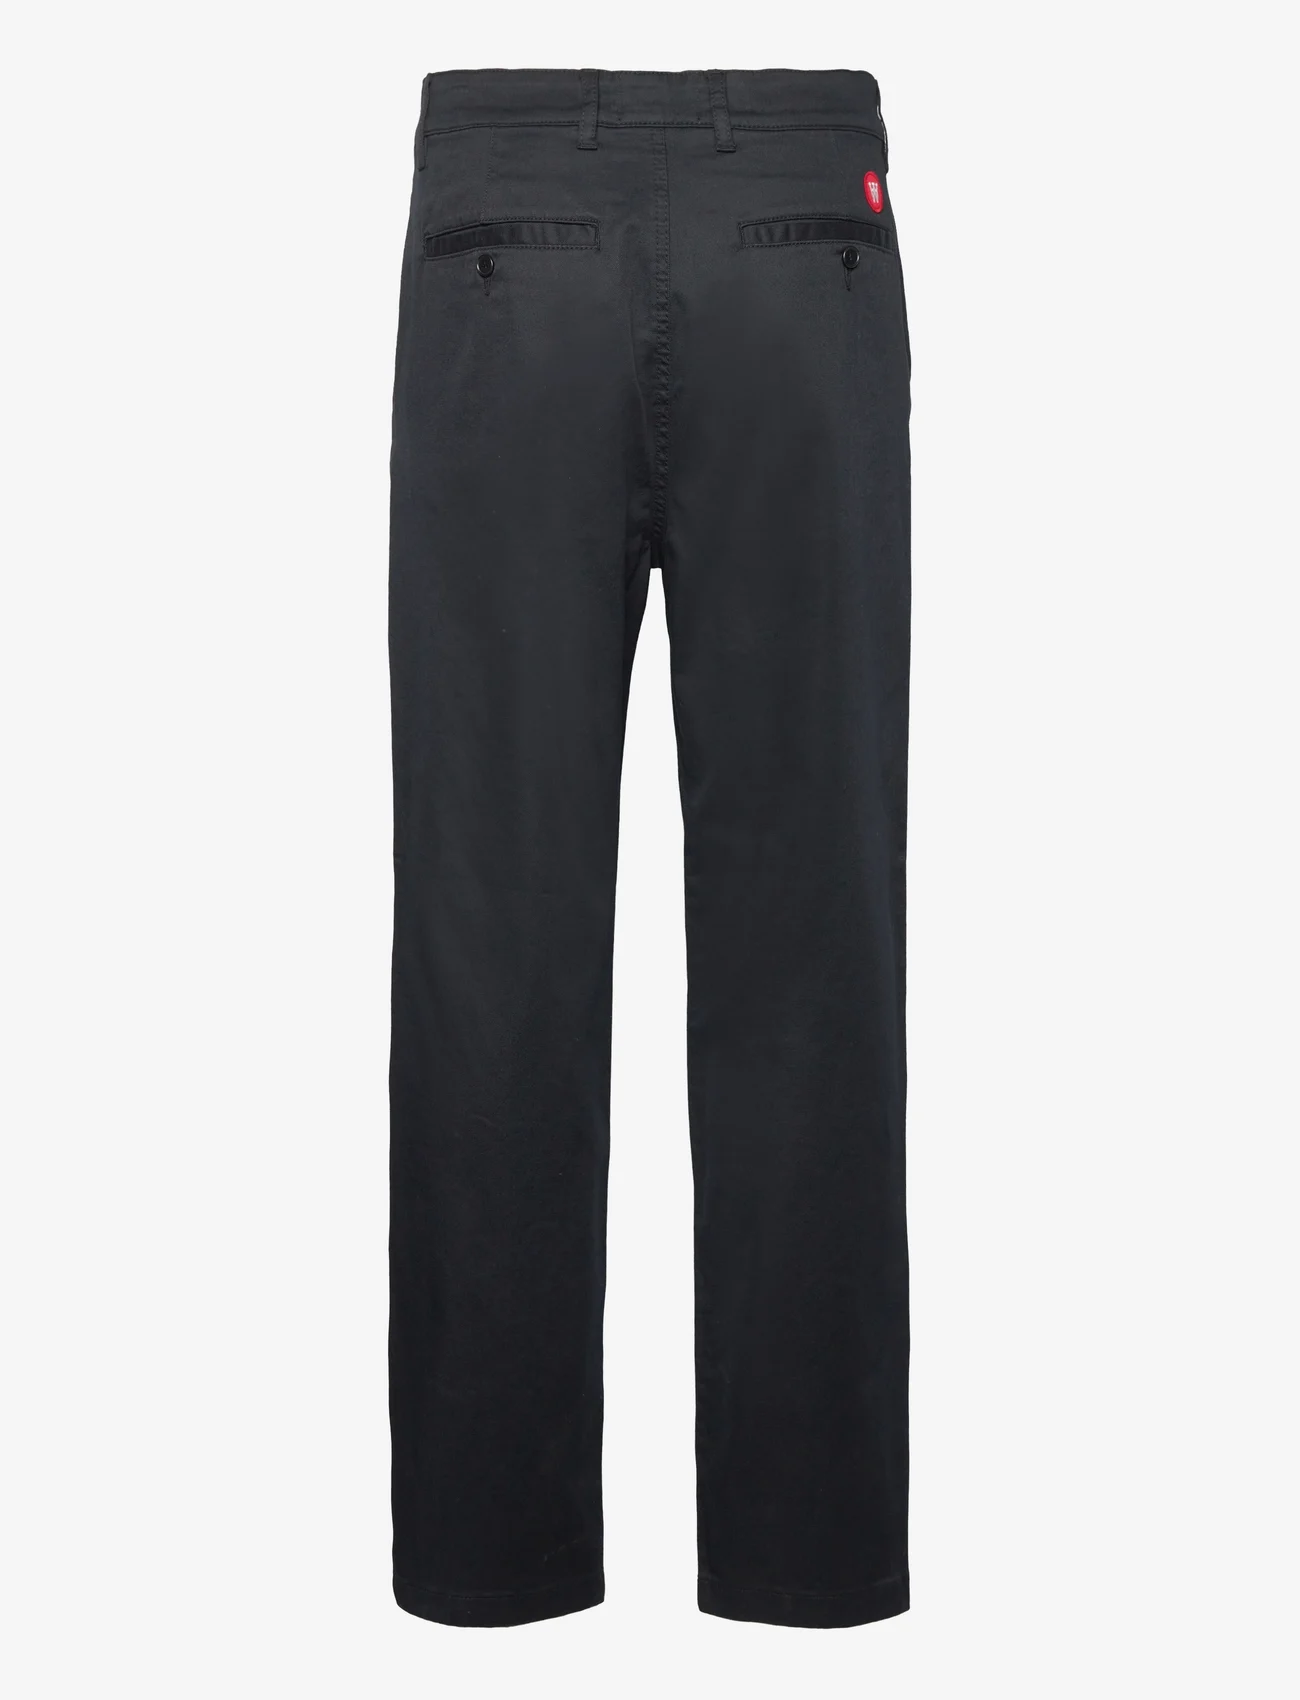 Double A by Wood Wood - Silas classic trousers - chinos - black - 1